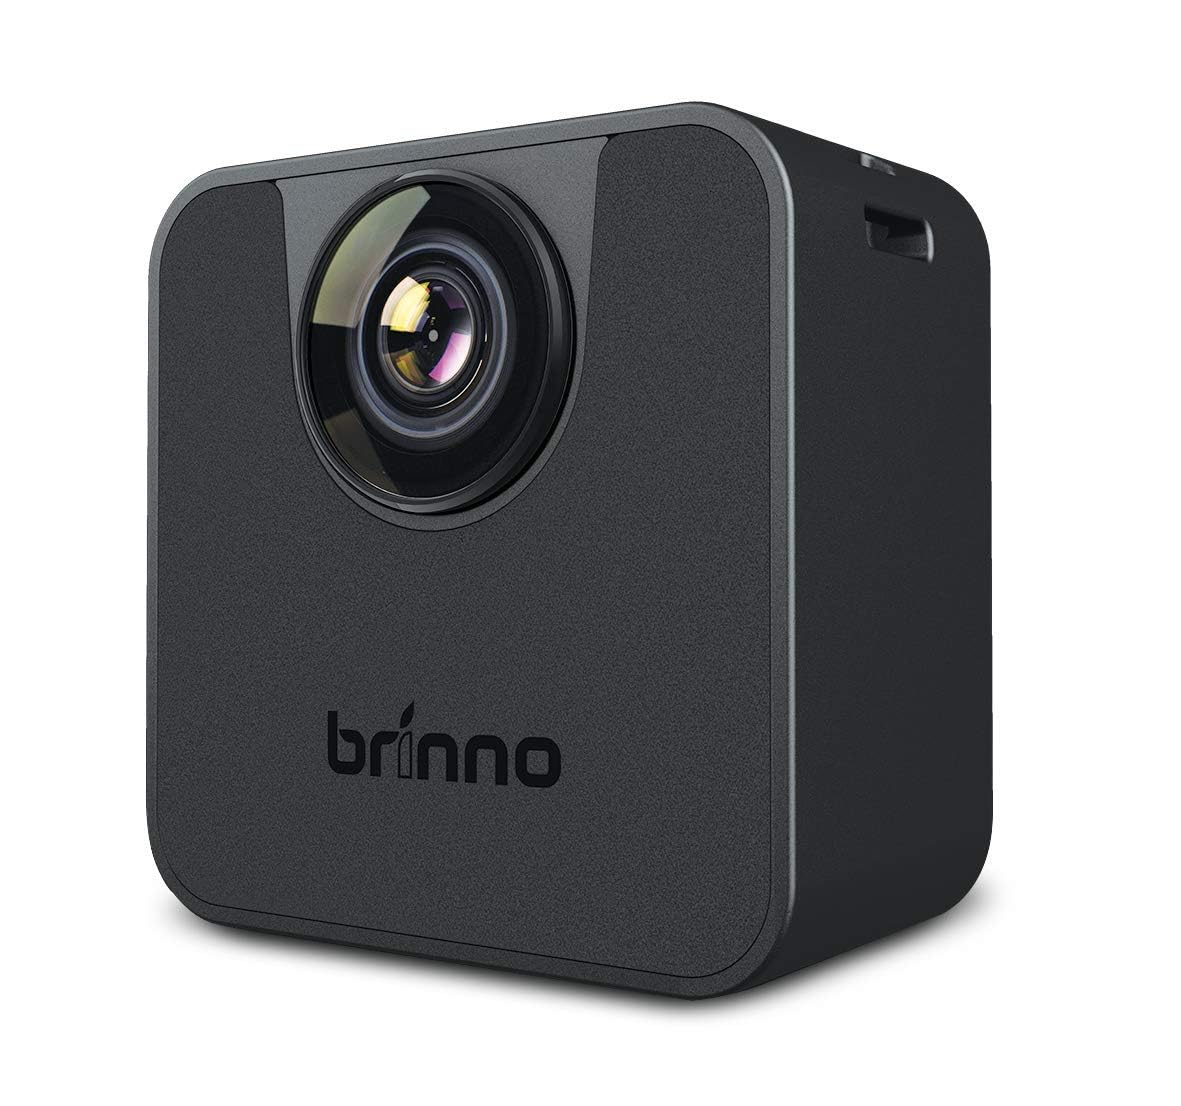 BRINNO TLC120 HDR TIME Lapse WI-FI Camera with Brinno Camera App Control for iOS Only Perfect for Work from Home Quarantin